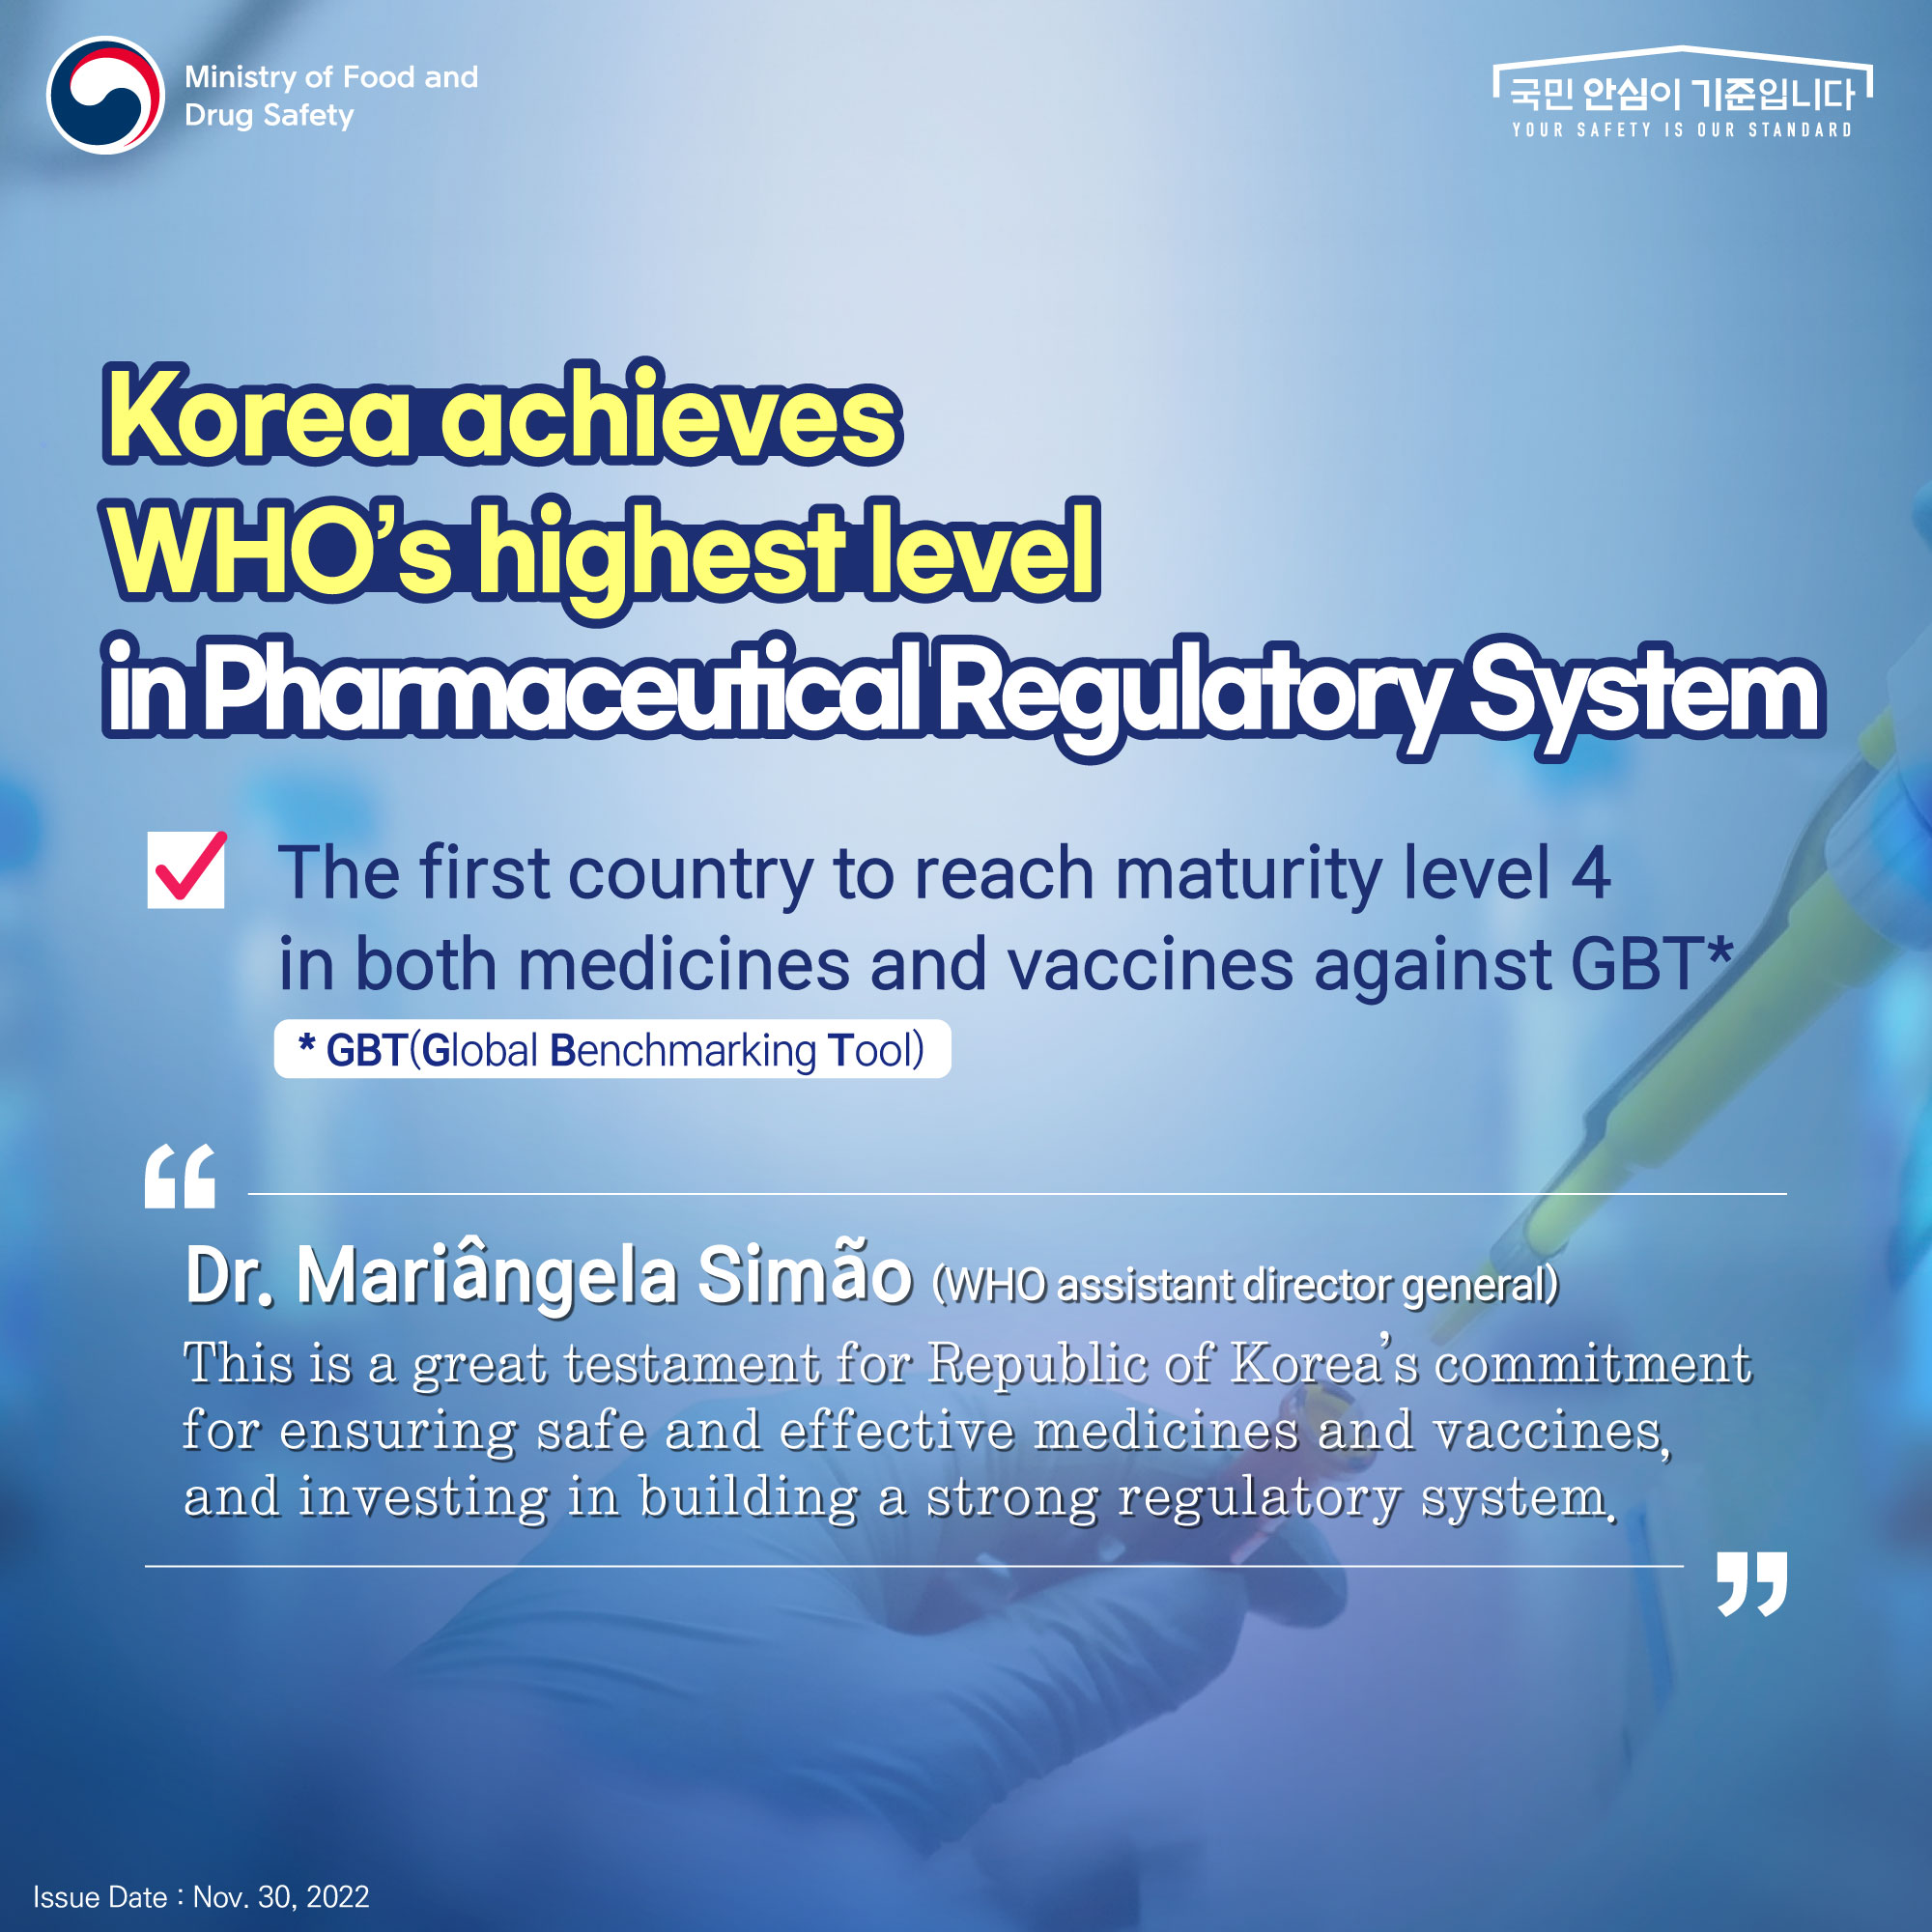 MFDS Achieves Highest Maturity Level in Regulatory System by WHO